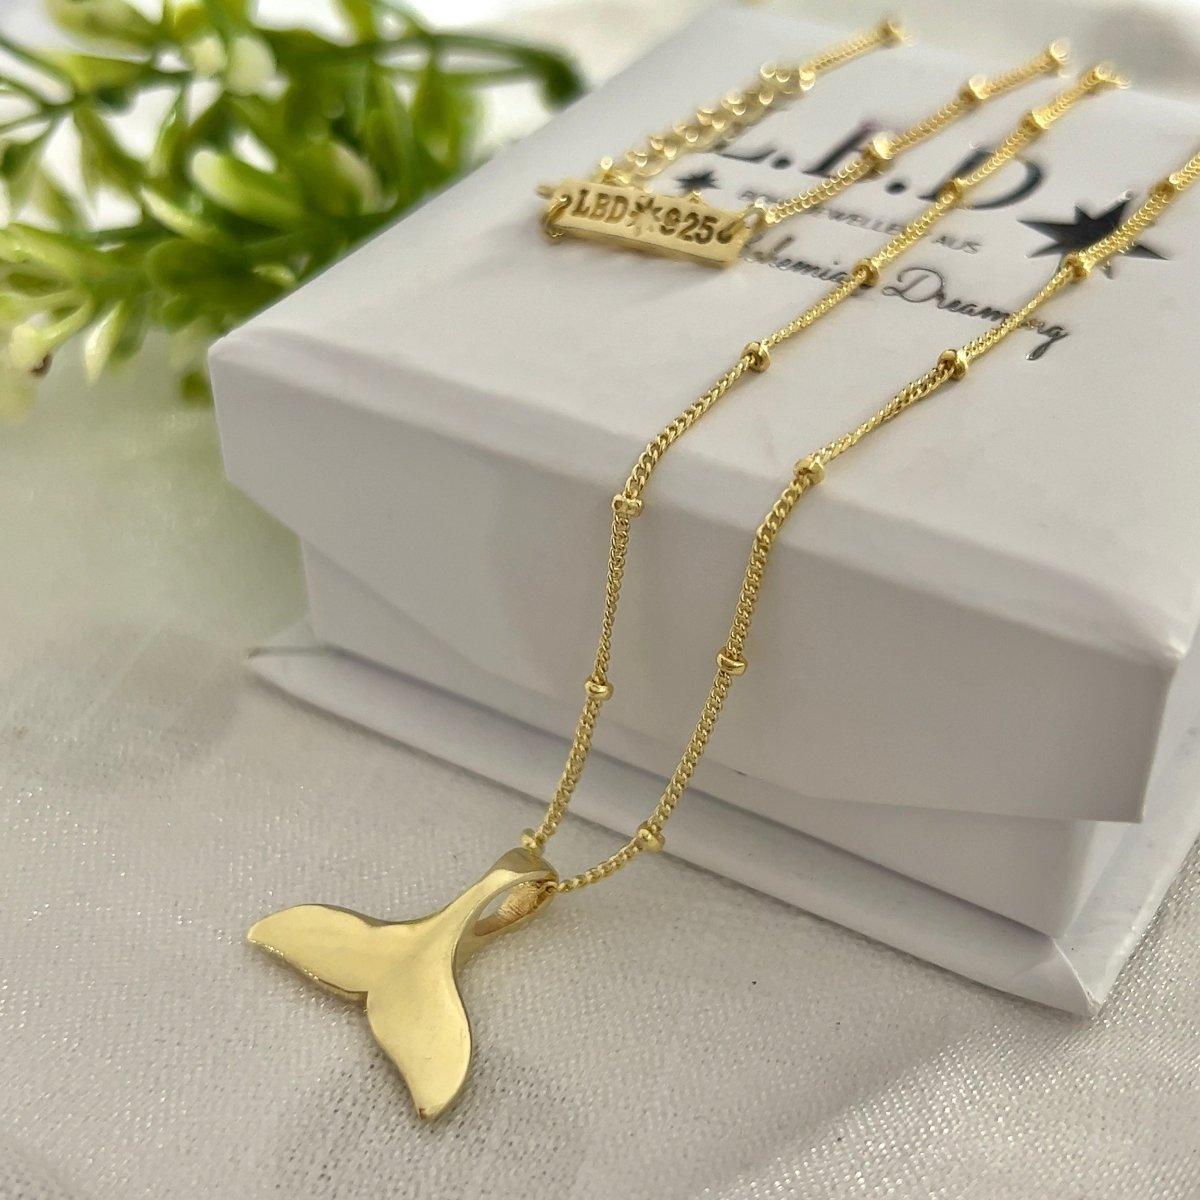 Gold whale tail necklace - delicate dainty black cord necklace with a gold  whale fin pendant. surfer necklace, gift for her, nautical – Shani & Adi  Jewelry